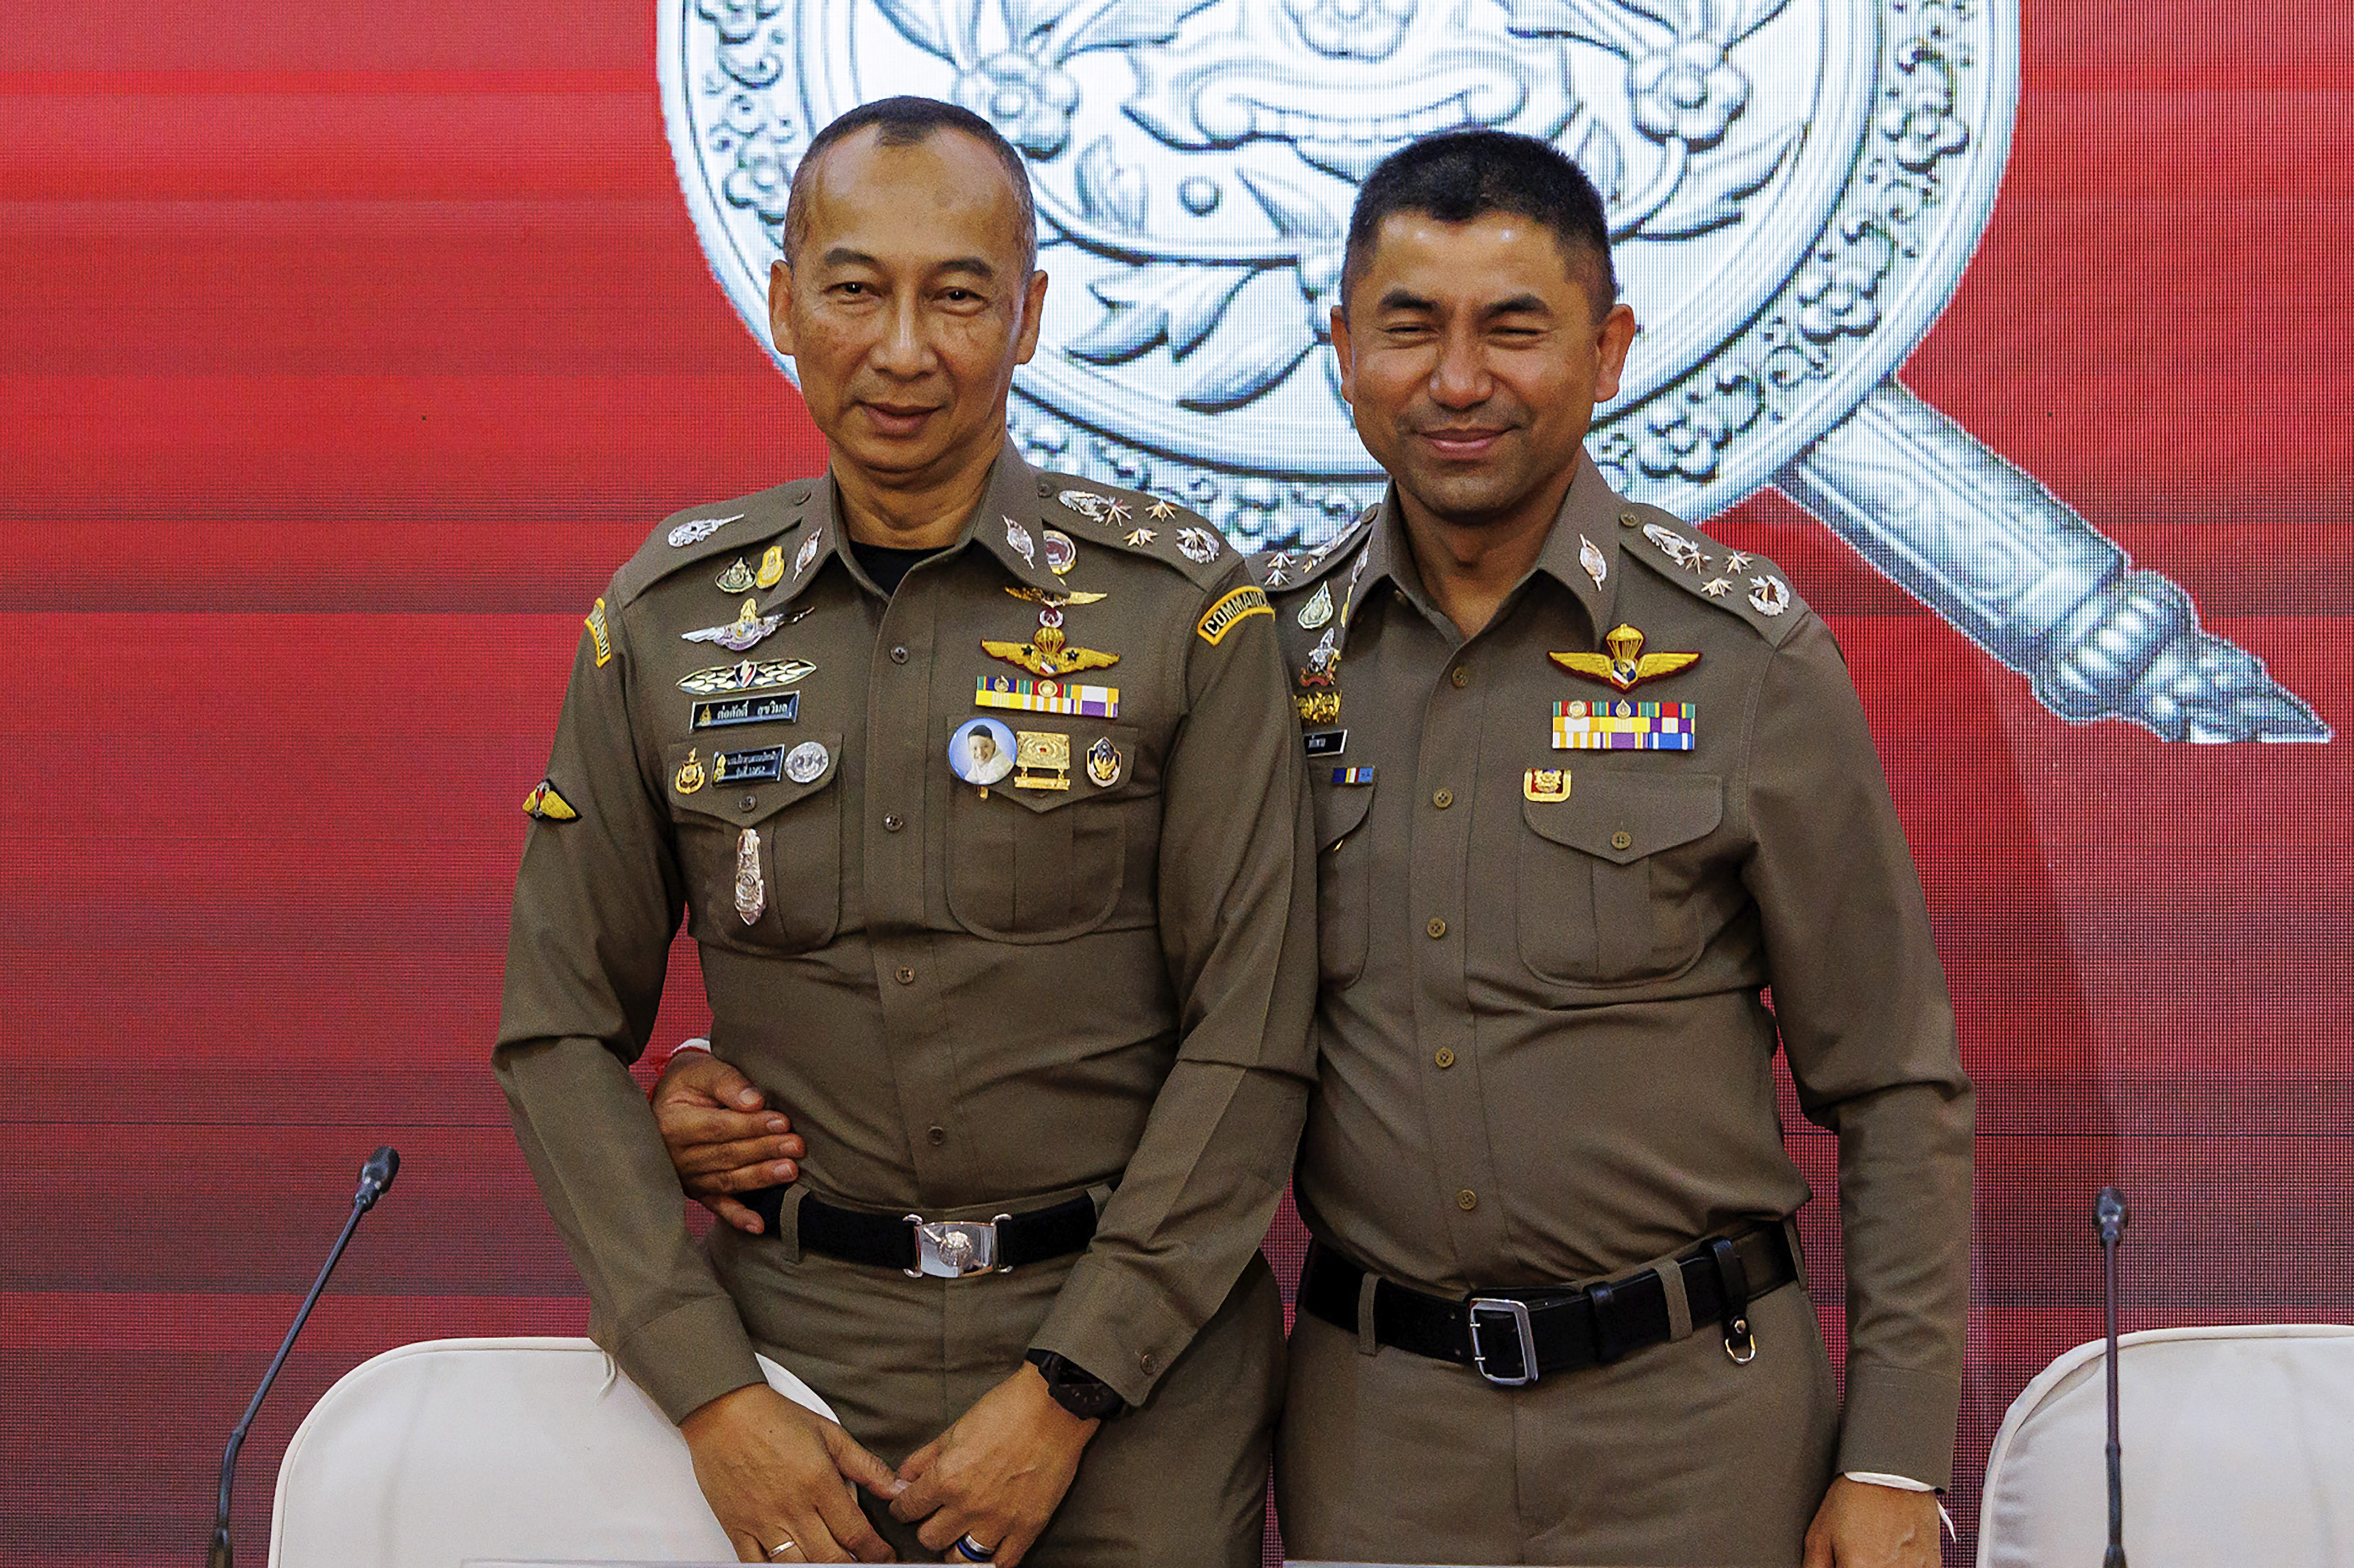 Chief Royal Thai Police Torsak Sukvimol (left) and Duputy Chief the royal Thai Police Surachate Hakparn embrace after a press conference in Bangkok. Thailand’s national police chief and a deputy were ordered to be suspended by the Prime Minister on Wednesday, following a feud that escalated over the past few weeks, pointing to serious conflicts within the highest echelons of the police department. Photo: AP